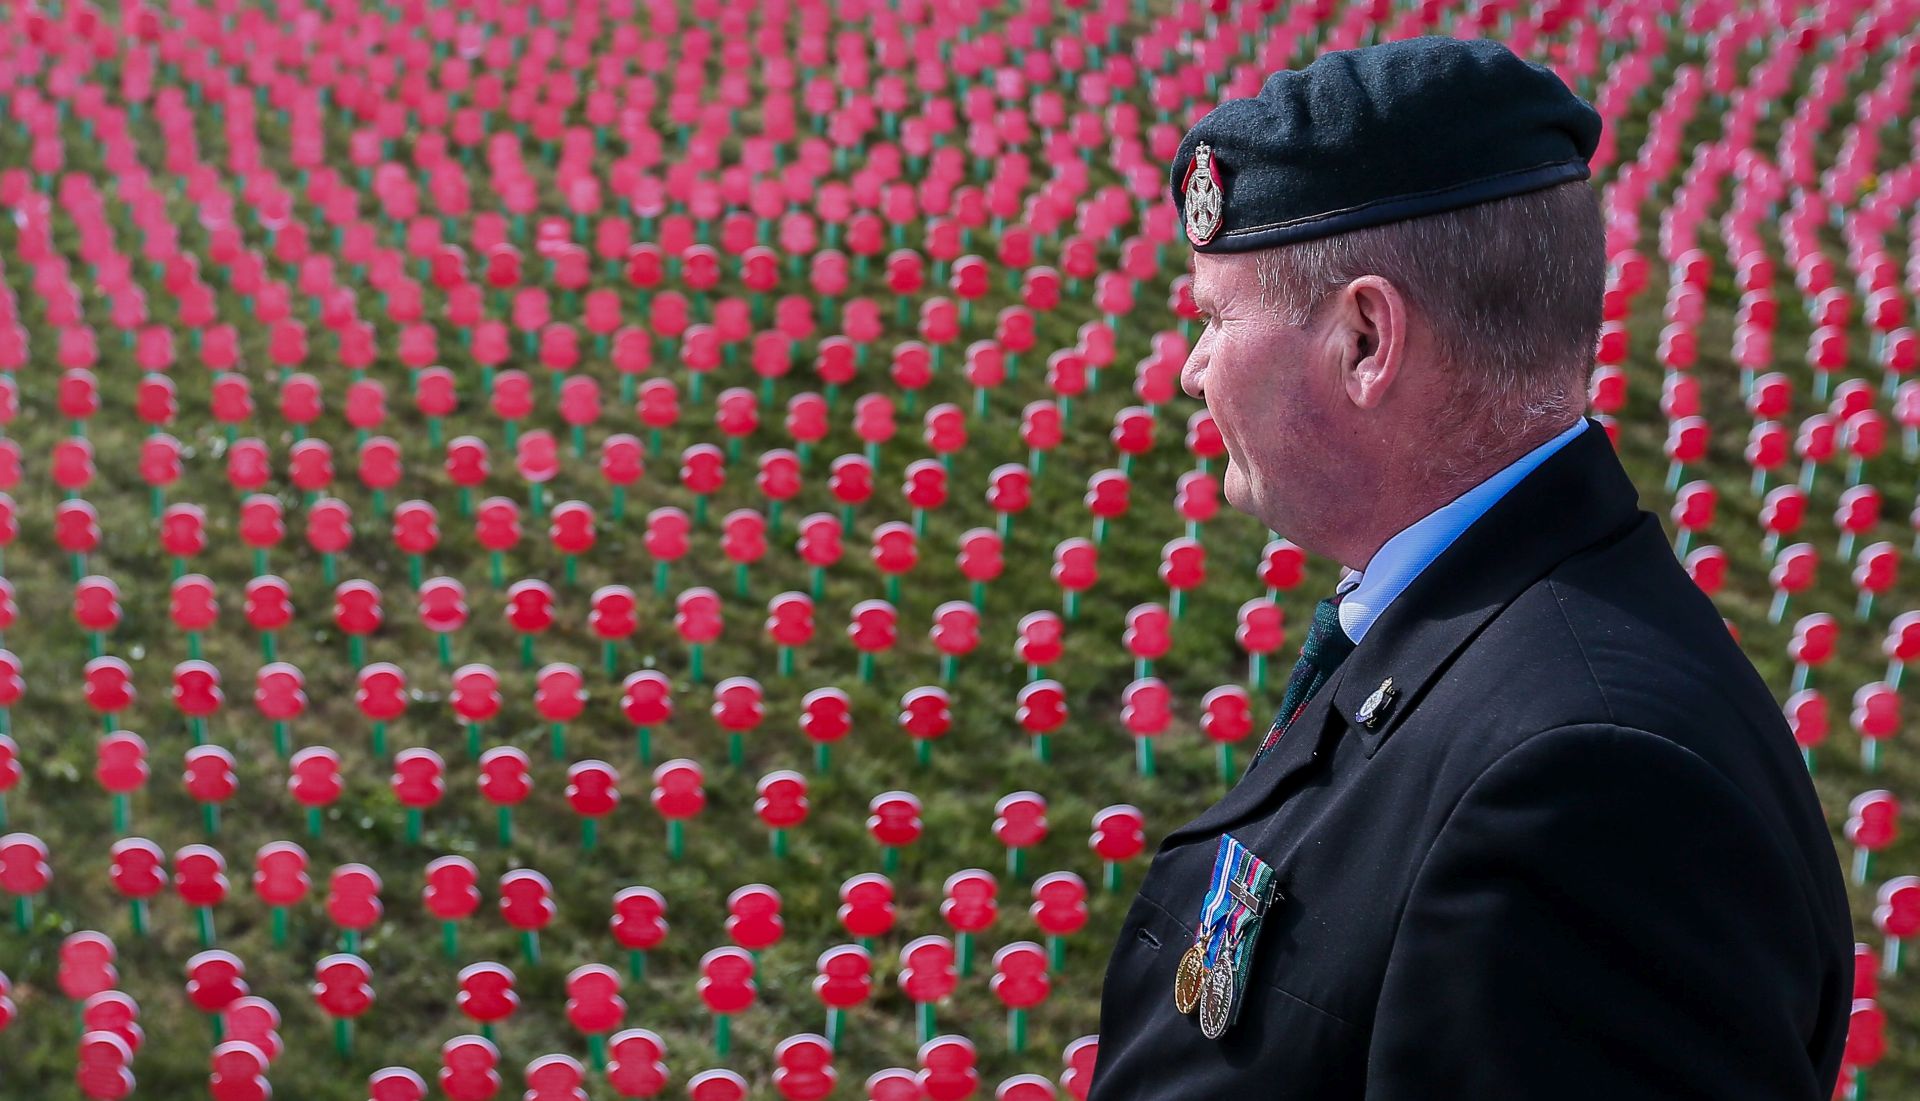 epa06118499 A man look at the memorial of poppies at the Tyne Cot Commonwealth War Graves Cemetery as part of the Centenary of Passchendaele - Third Battle of Ypres in Zonnebeke, Belgium, 31 July 2017. The Battle of Passchendaele or the Third Battle of Ypres, a campaign of the First World War, took place from July to November 1917. During the Battle of Passchendaele, an estimated 245,000 allied and 215,000 German casualties (dead, wounded or missing) fell after approximately 100 days of heavy fighting.  EPA/STEPHANIE LECOCQ